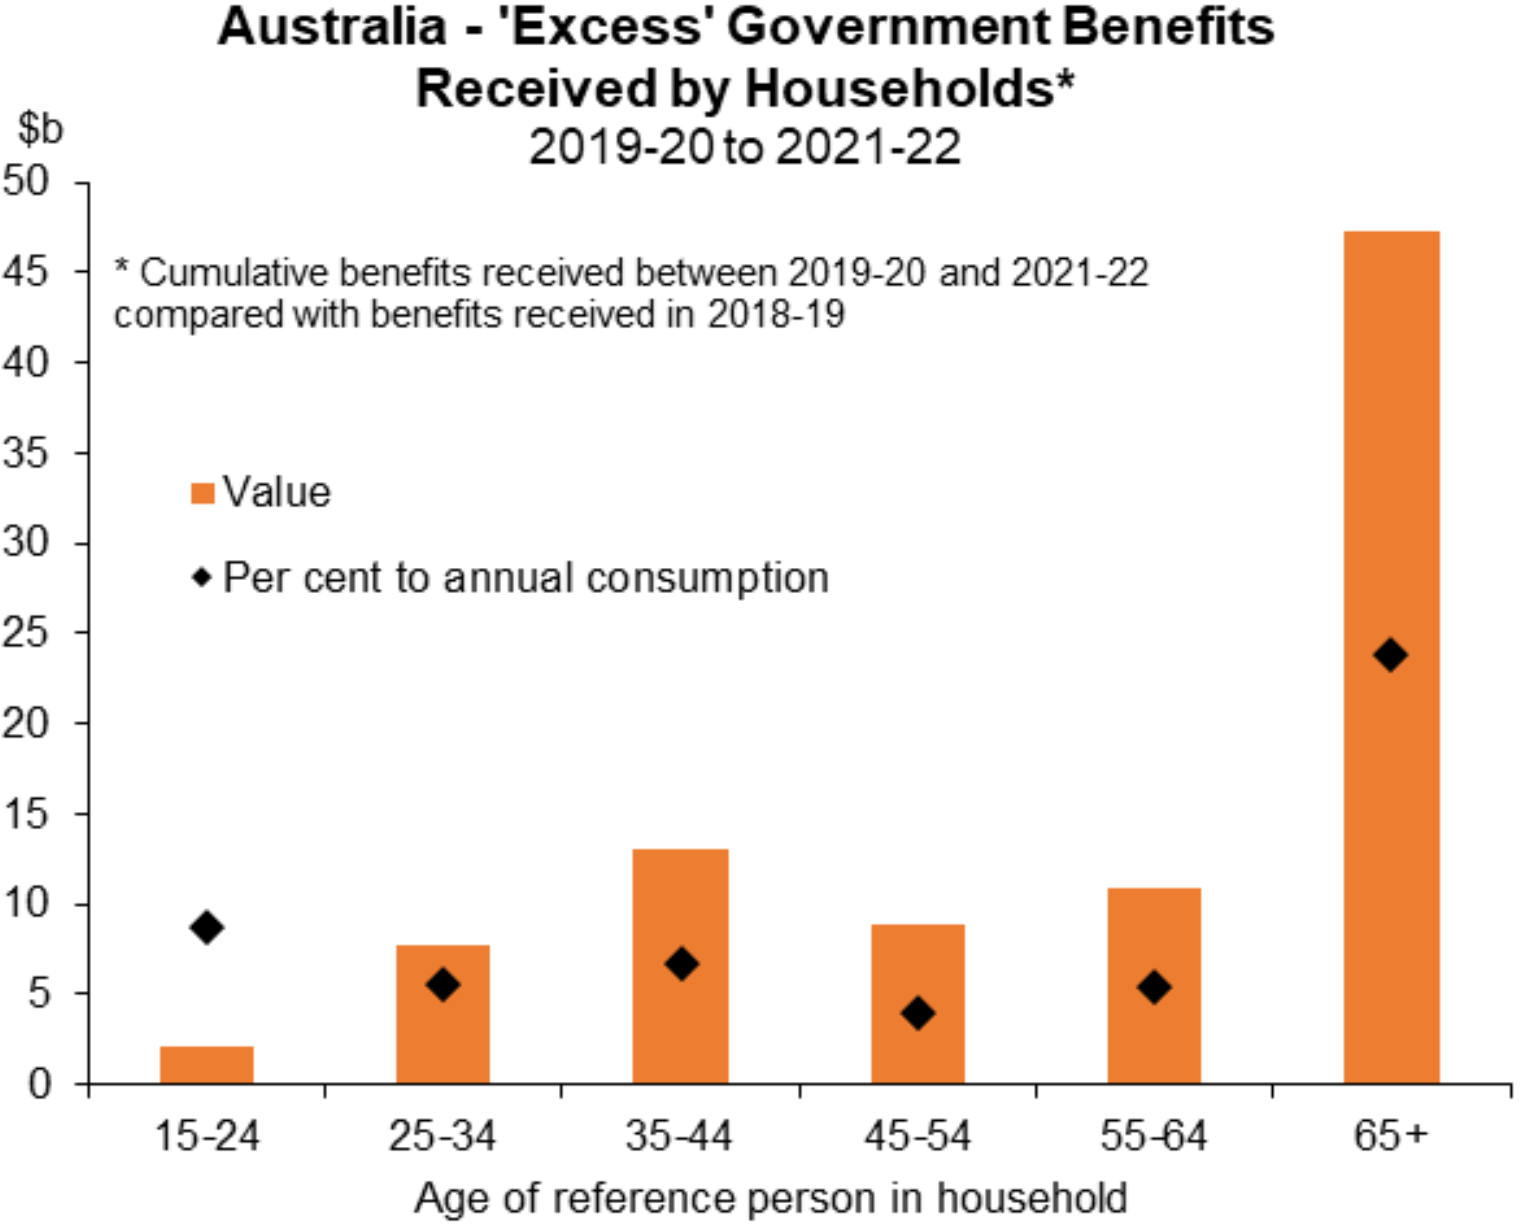 Subsidies from Australian governments